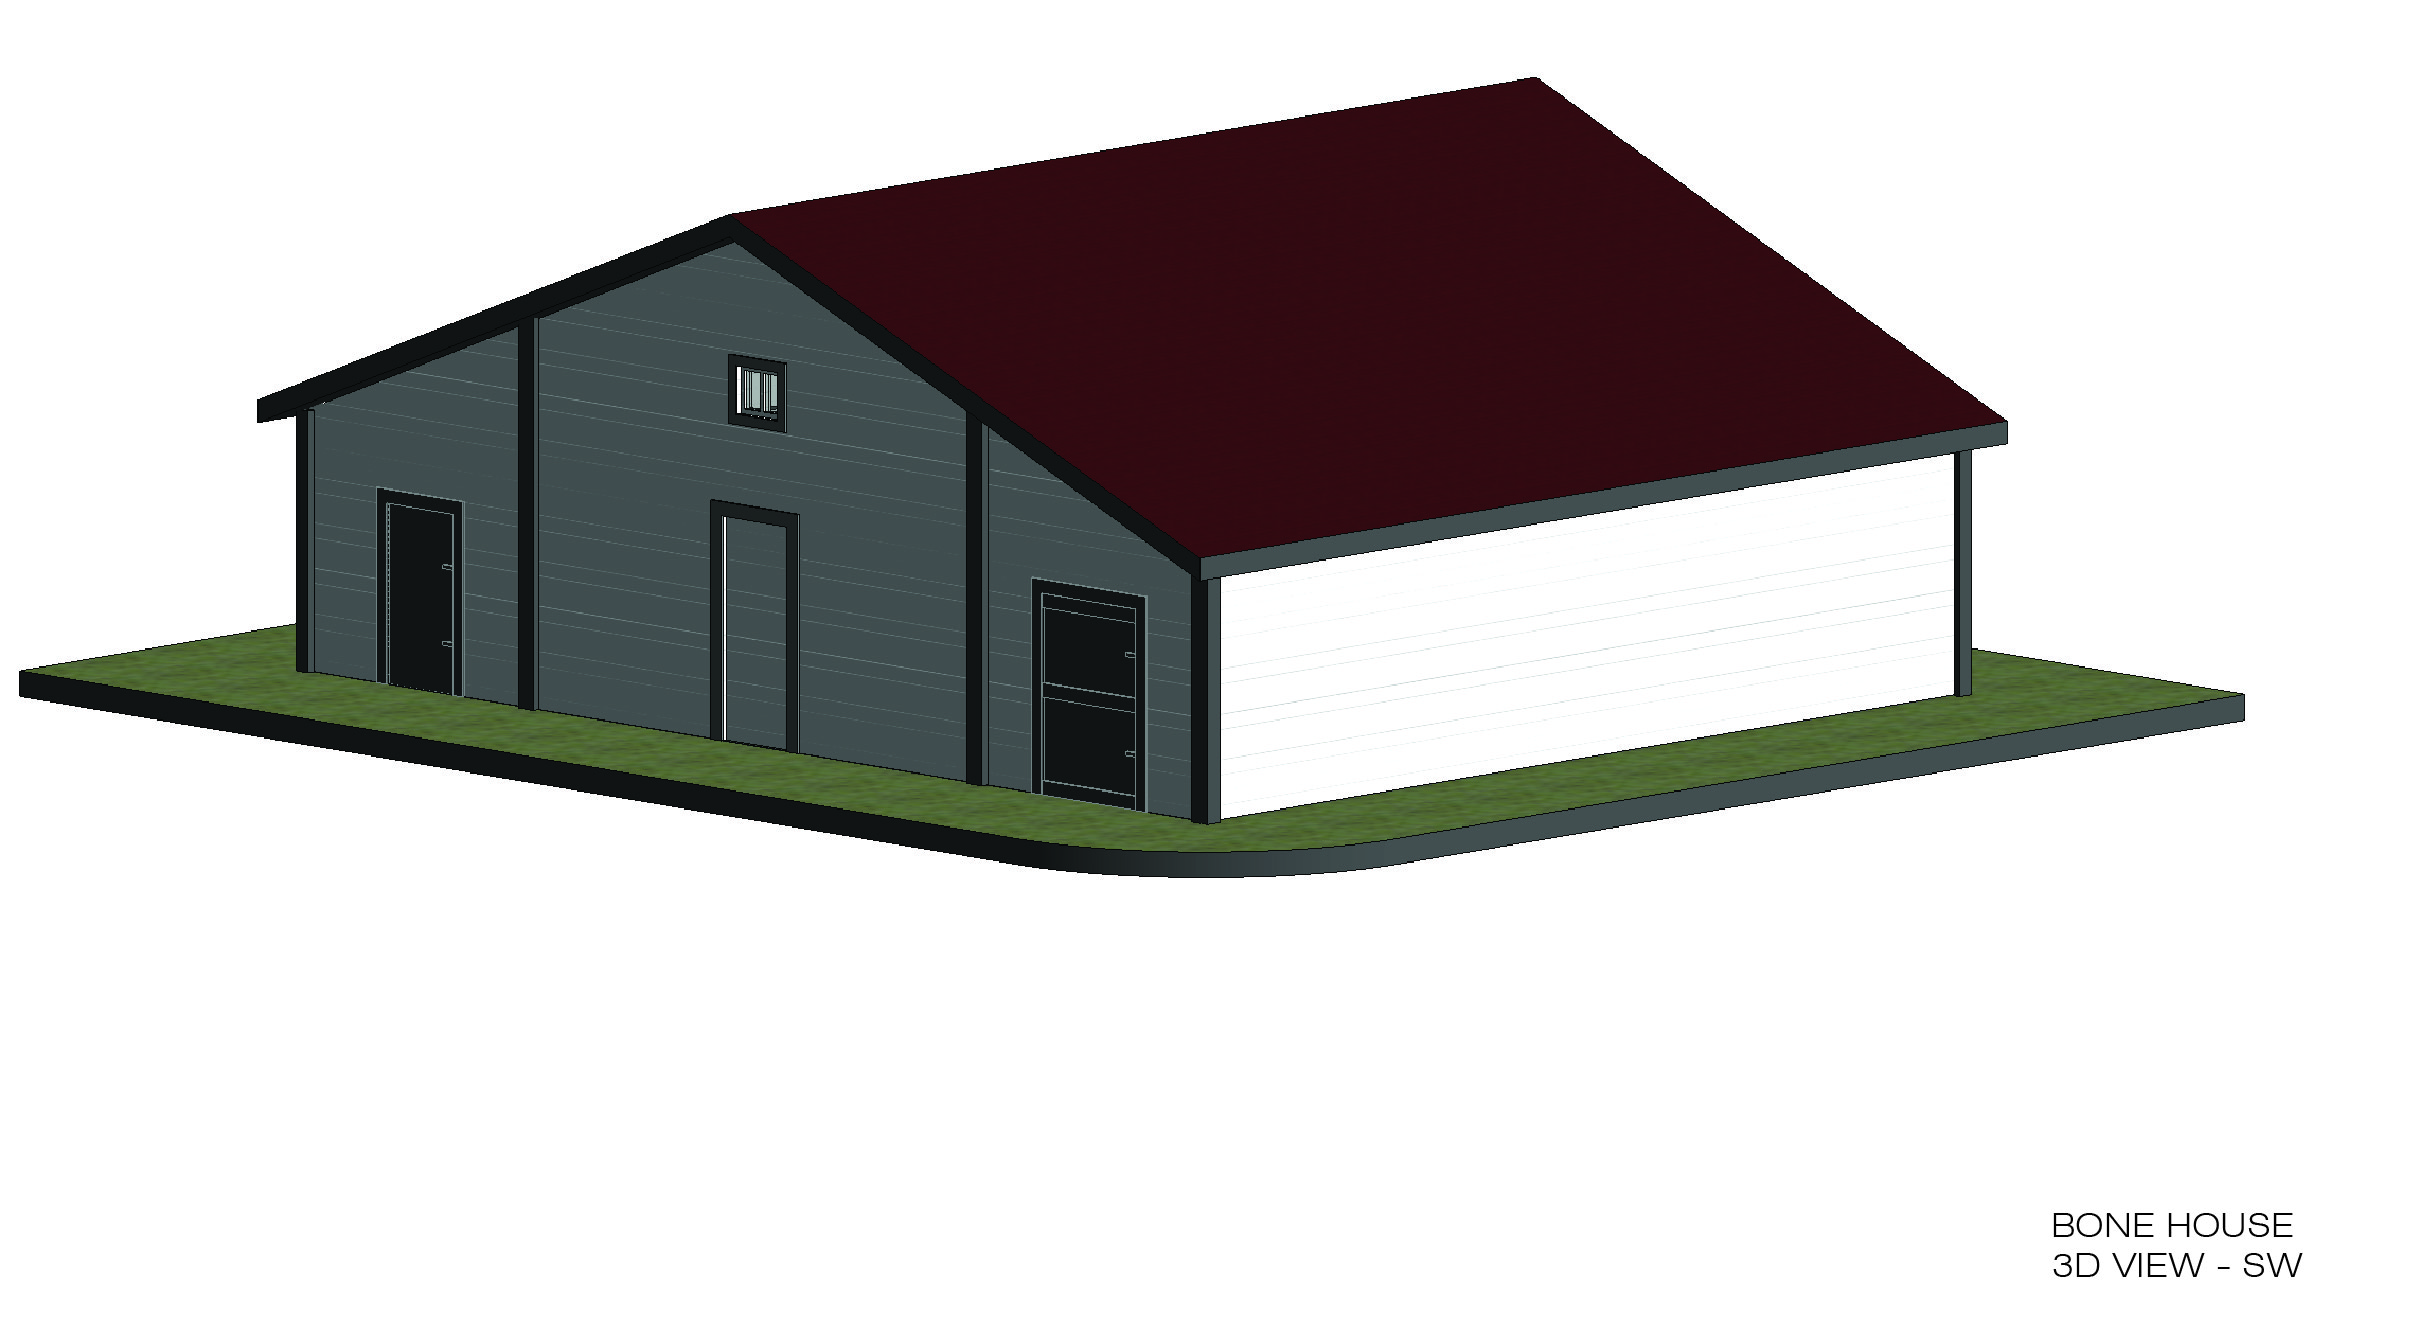 View of a 3D model generated from the laser scanning data collected of the Bonehouse in Revit.